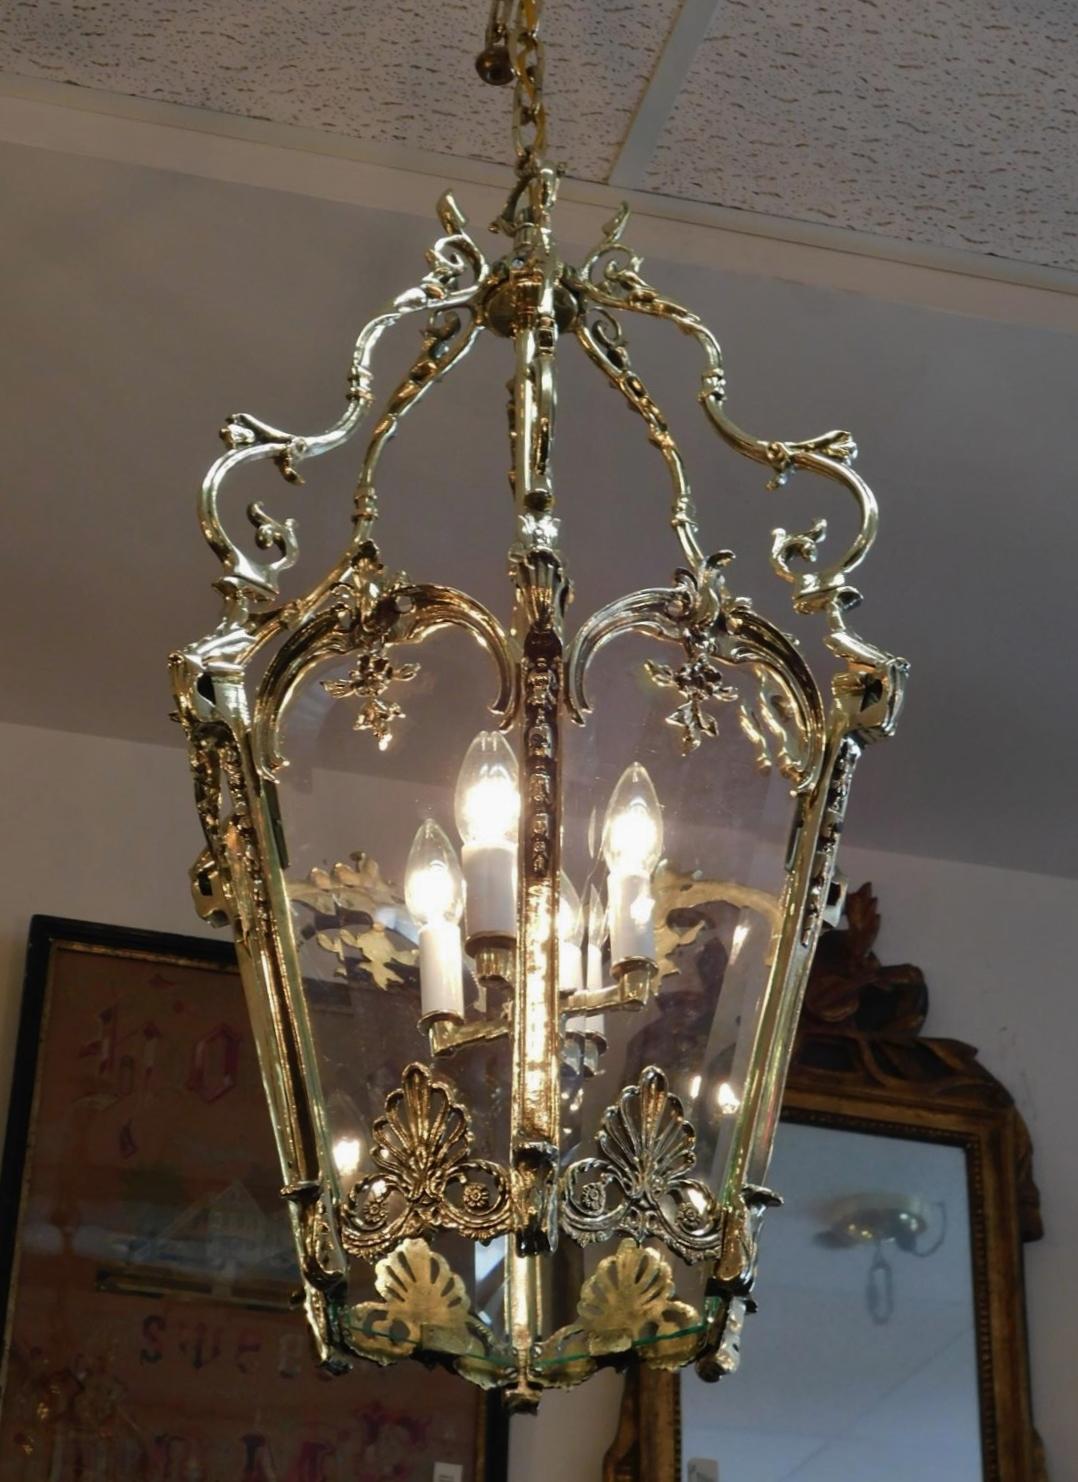 Cast Pair of French Brass Foliage Shell & Beveled Glass Hanging Hall Lanterns, C 1820 For Sale